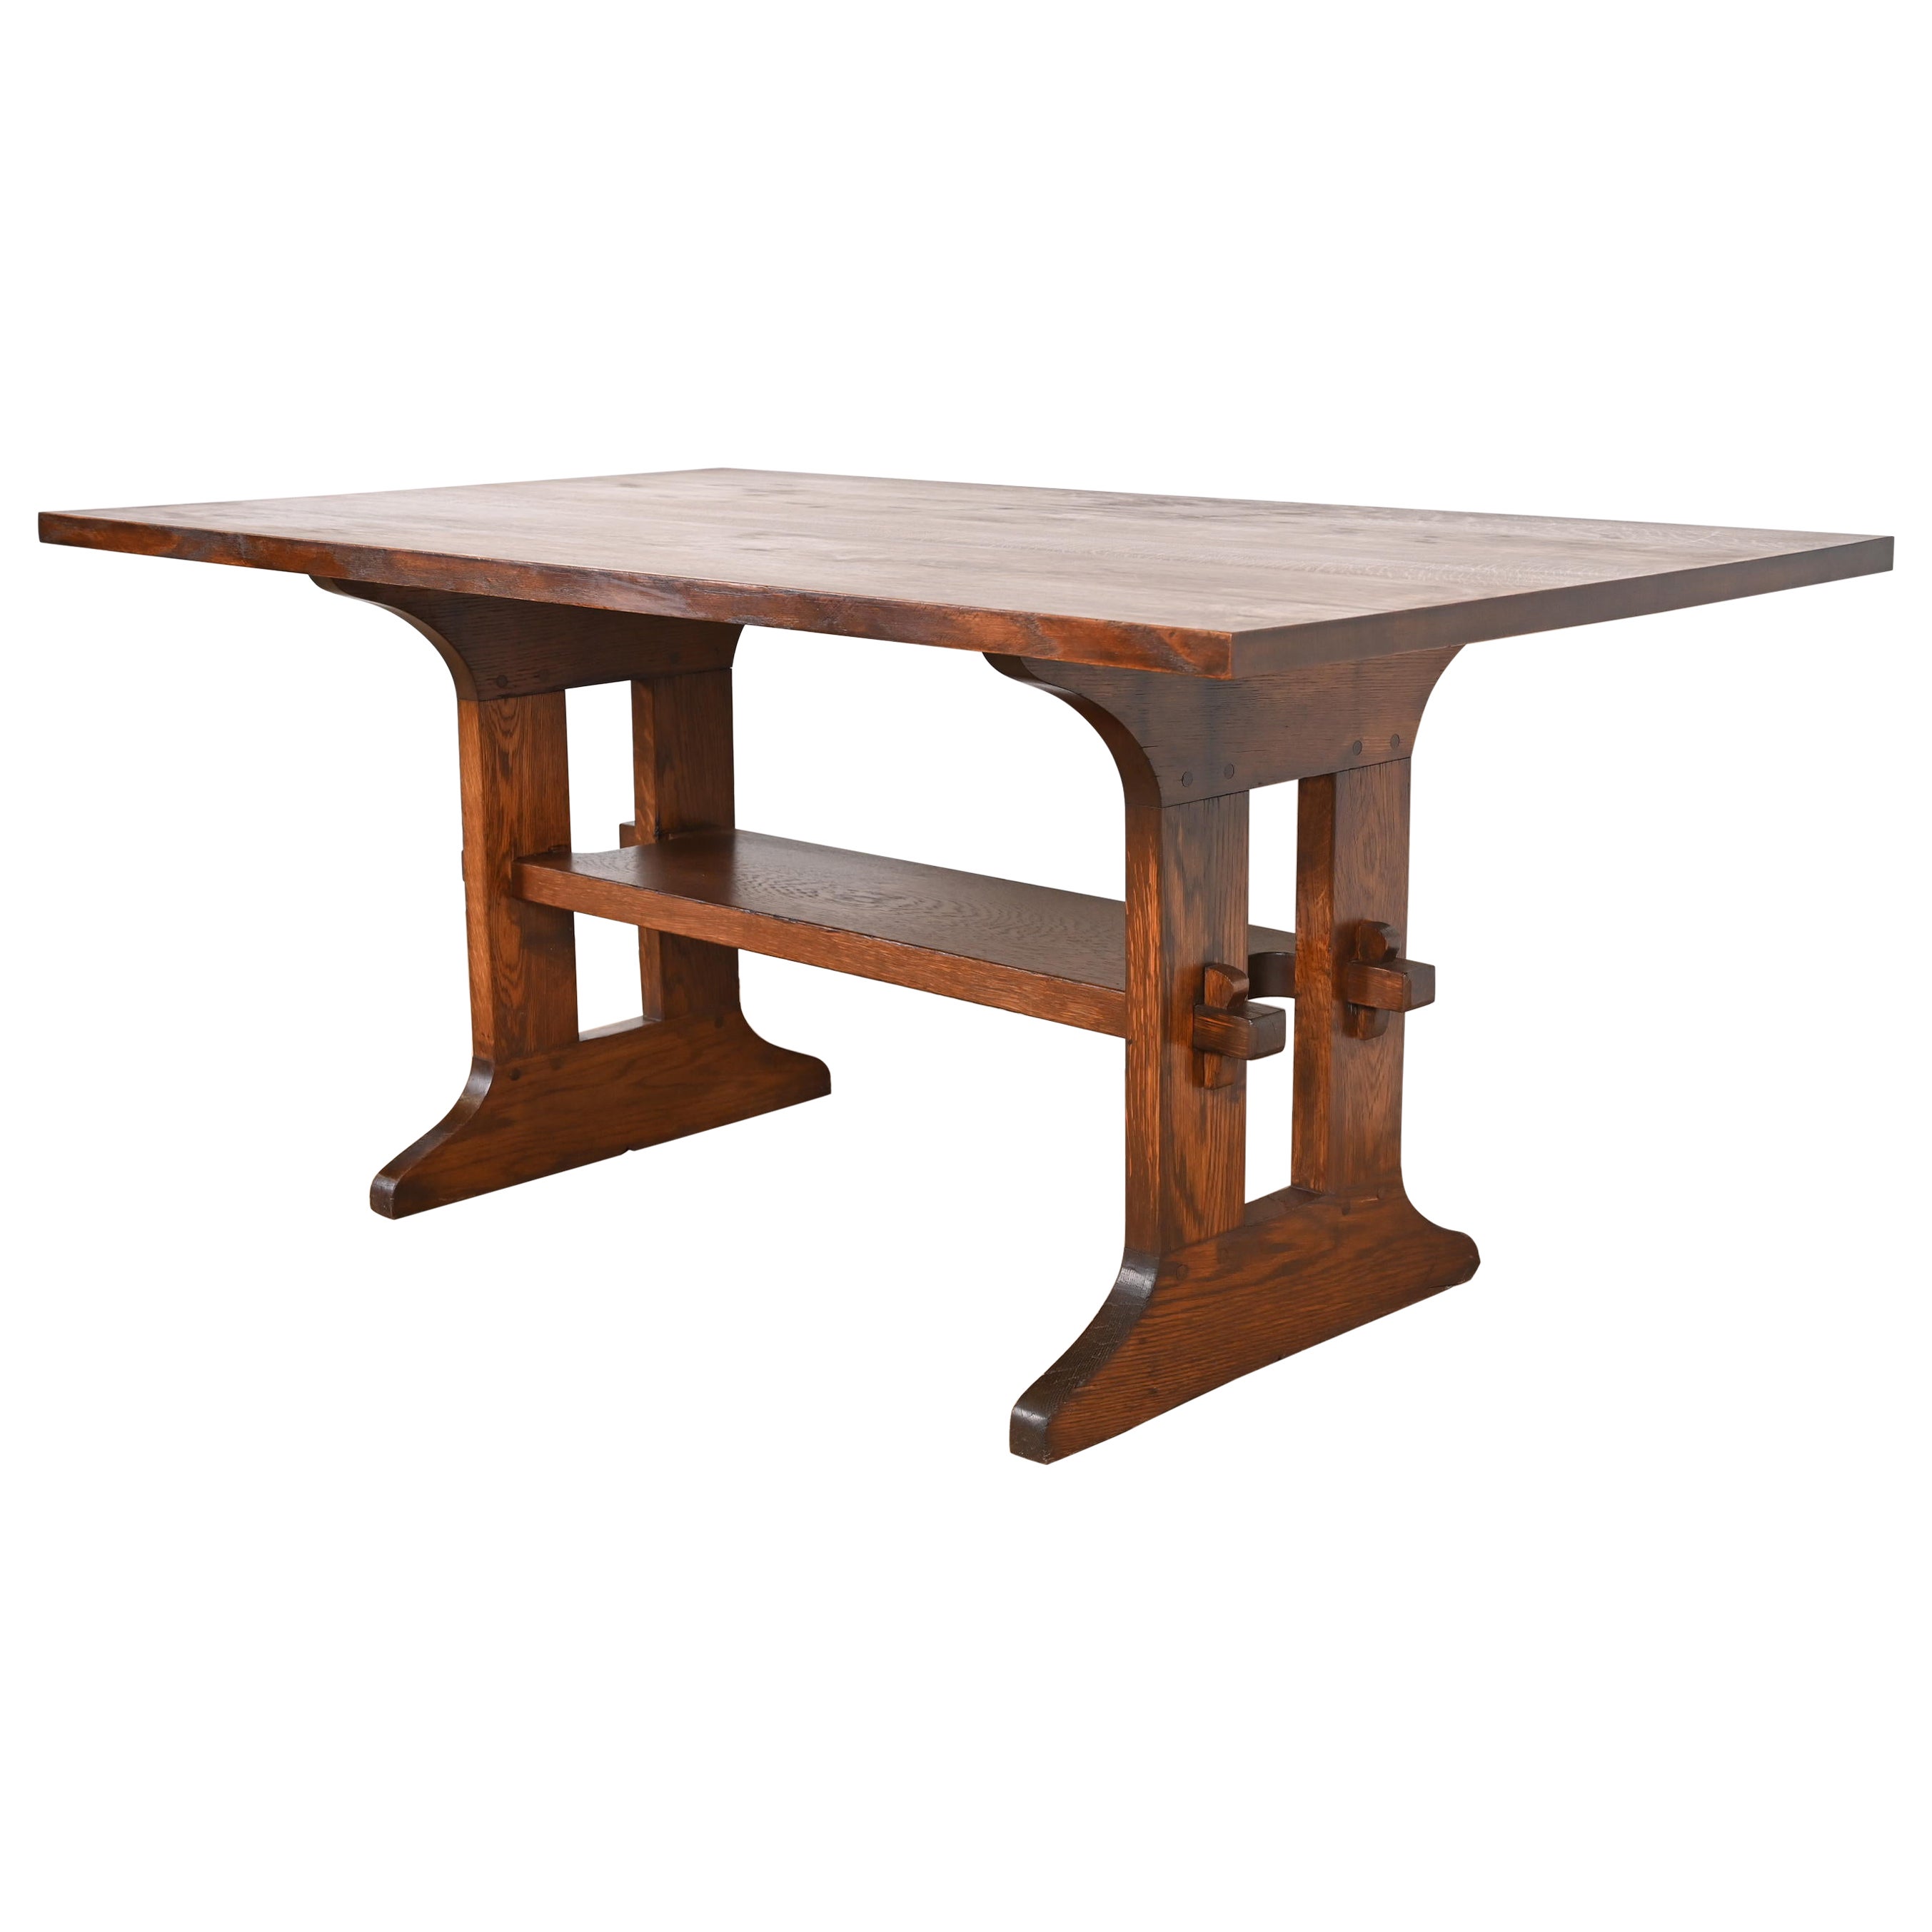  Gustav Stickley Mission Oak Arts & Crafts Trestle Dining Table or Library Table